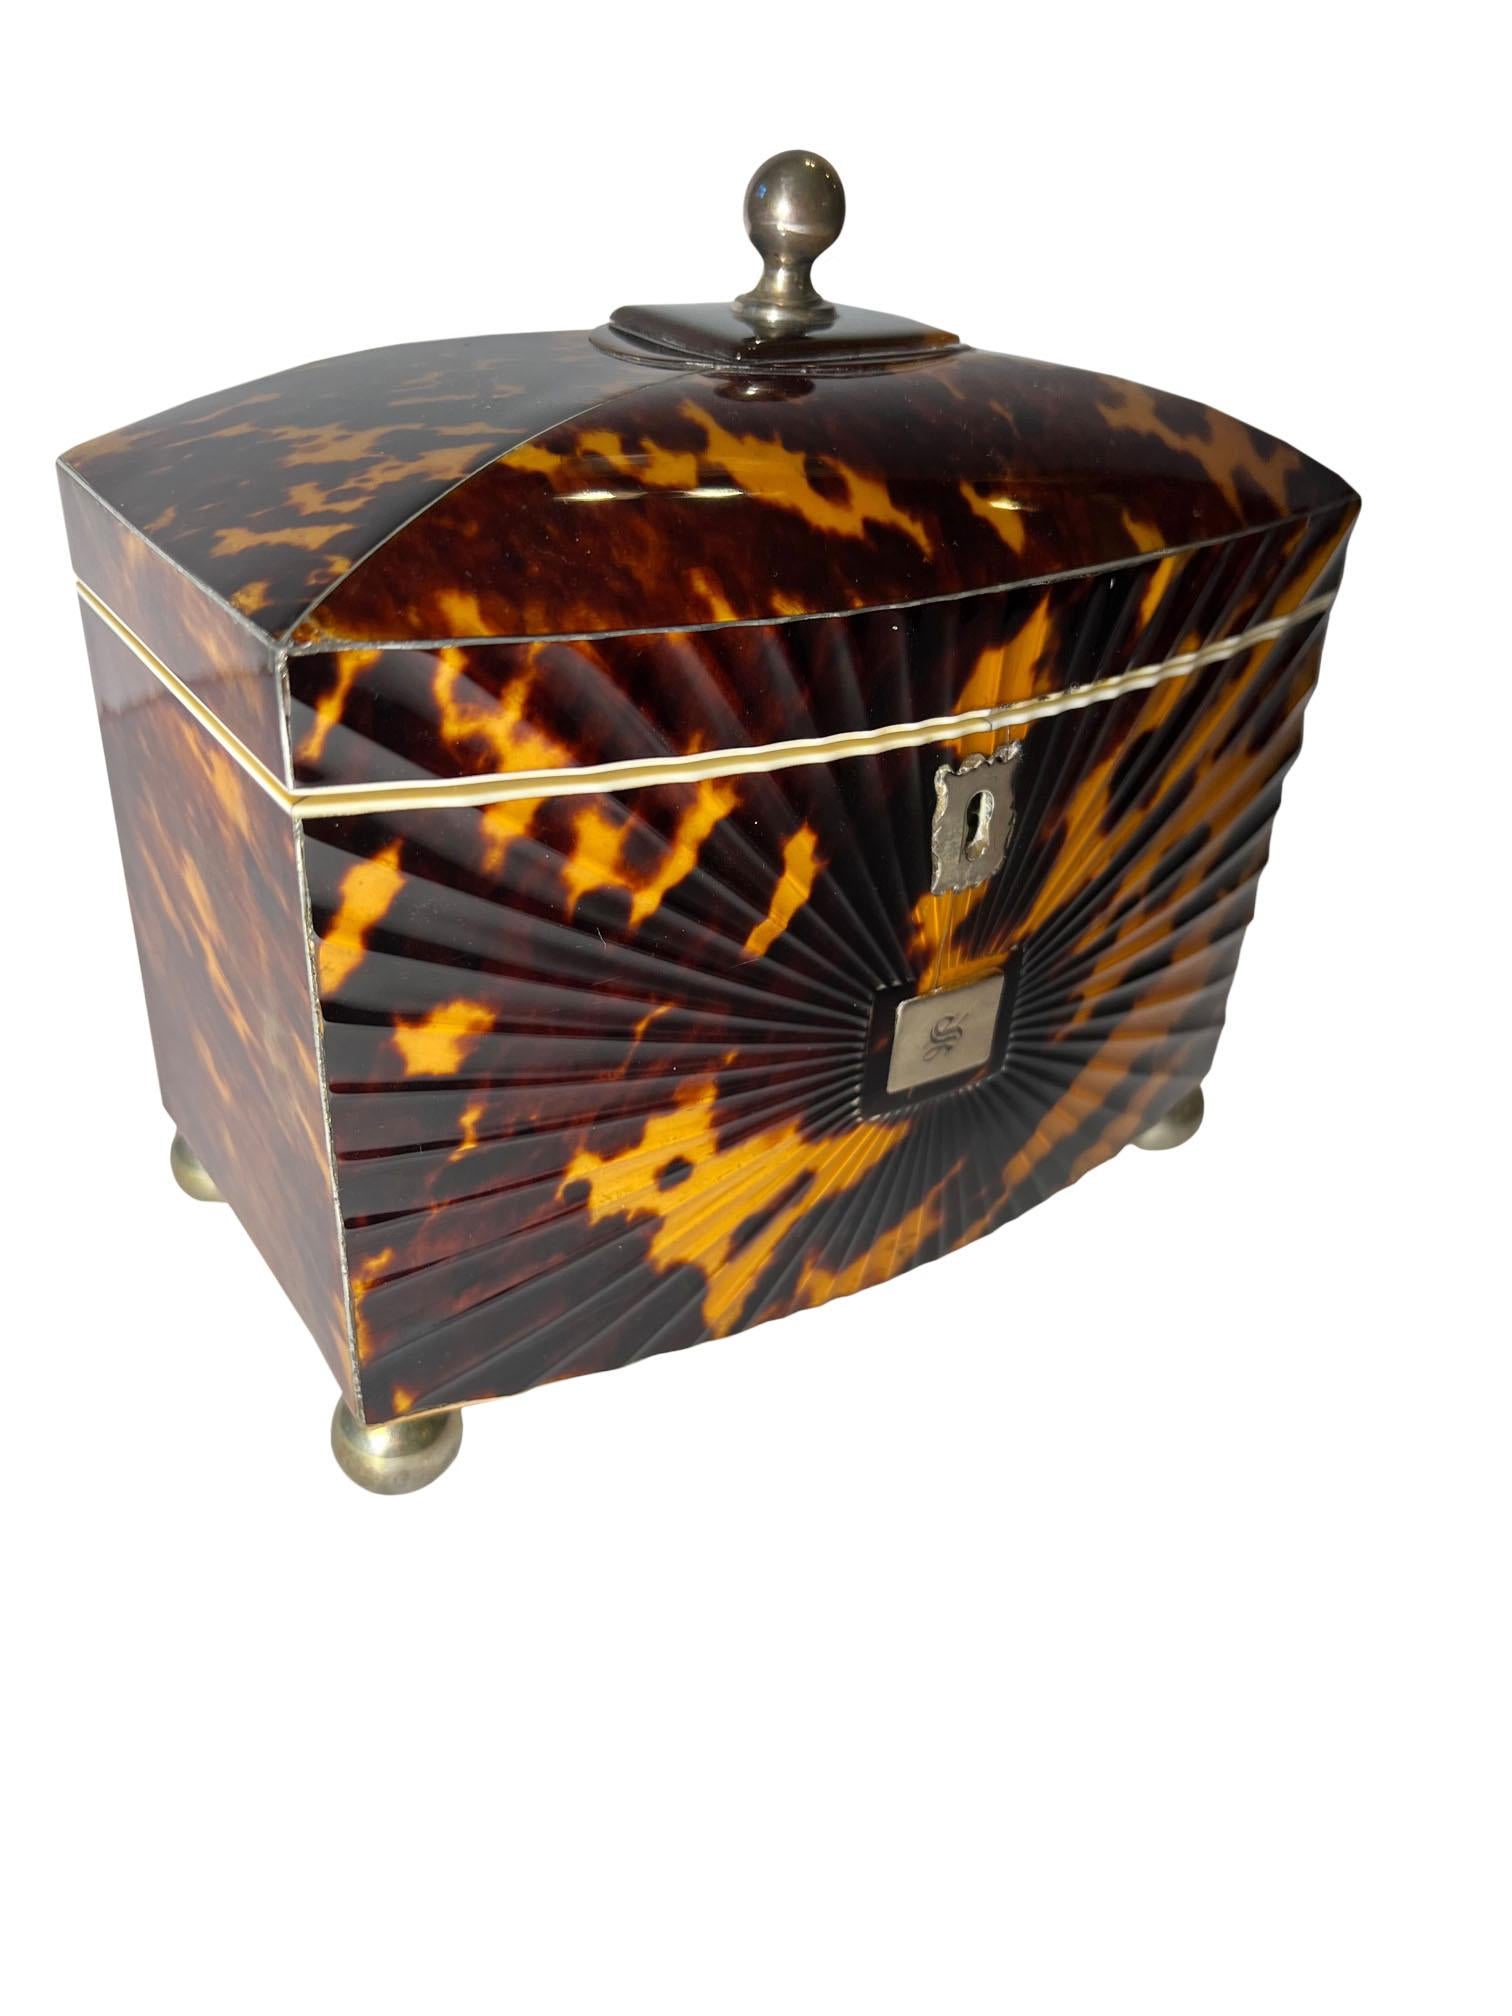 Circa 1870, English tortoiseshell tea caddy with sunburst design. It is absolutely the finest one I’ve ever owned! No cracks no restoration absolutely mint.